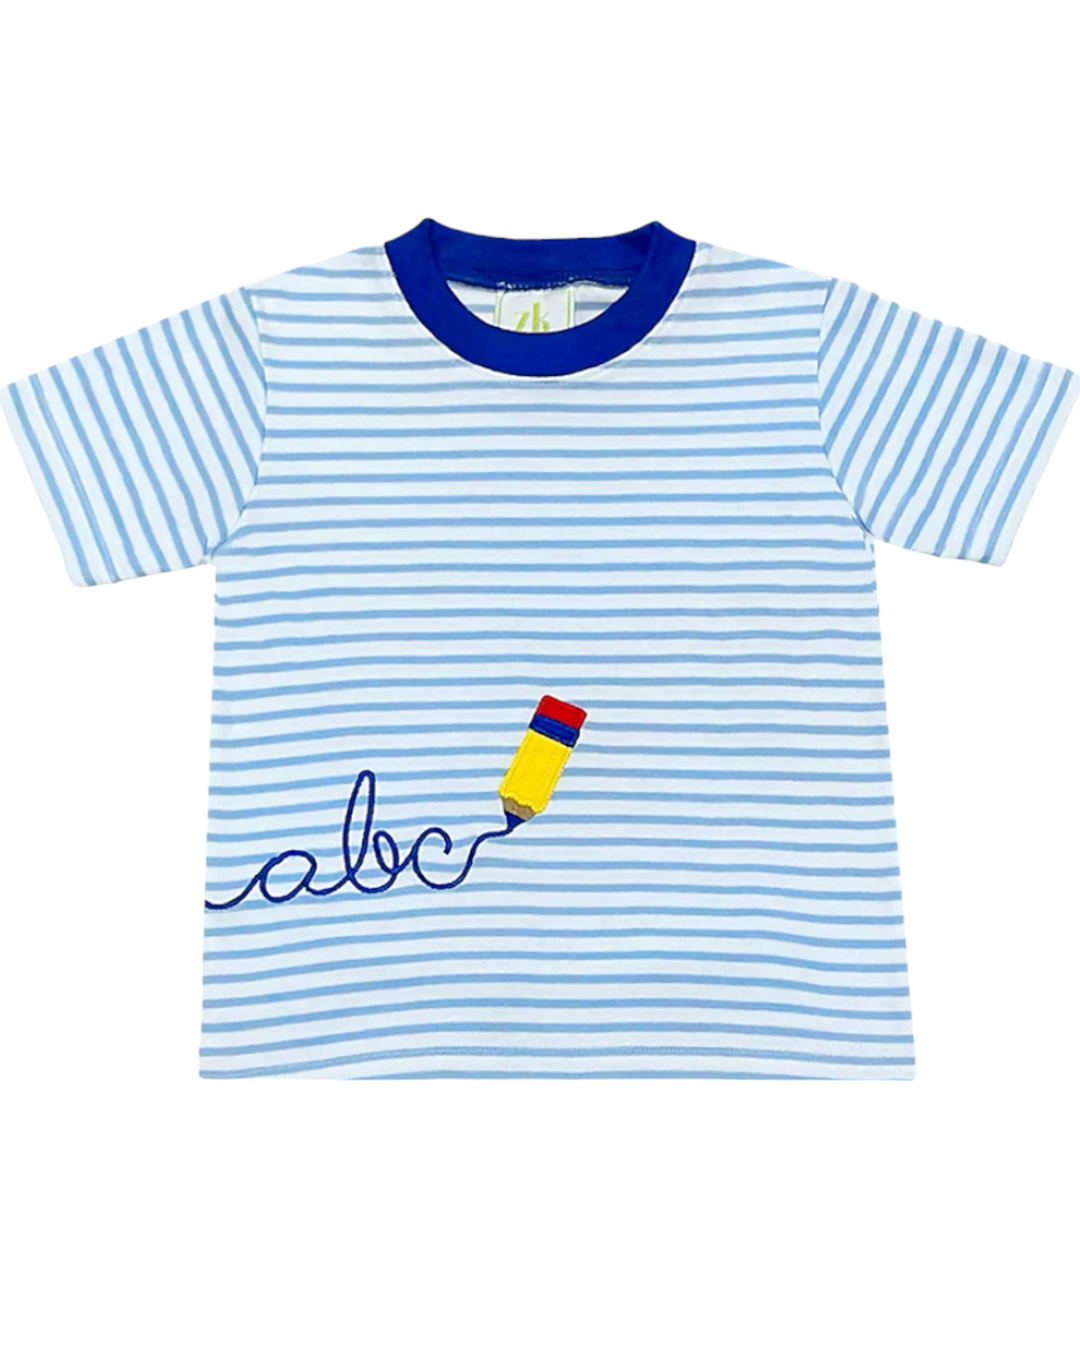 Calligraphy Harry's Play Blue Stripe Boys Tee, front